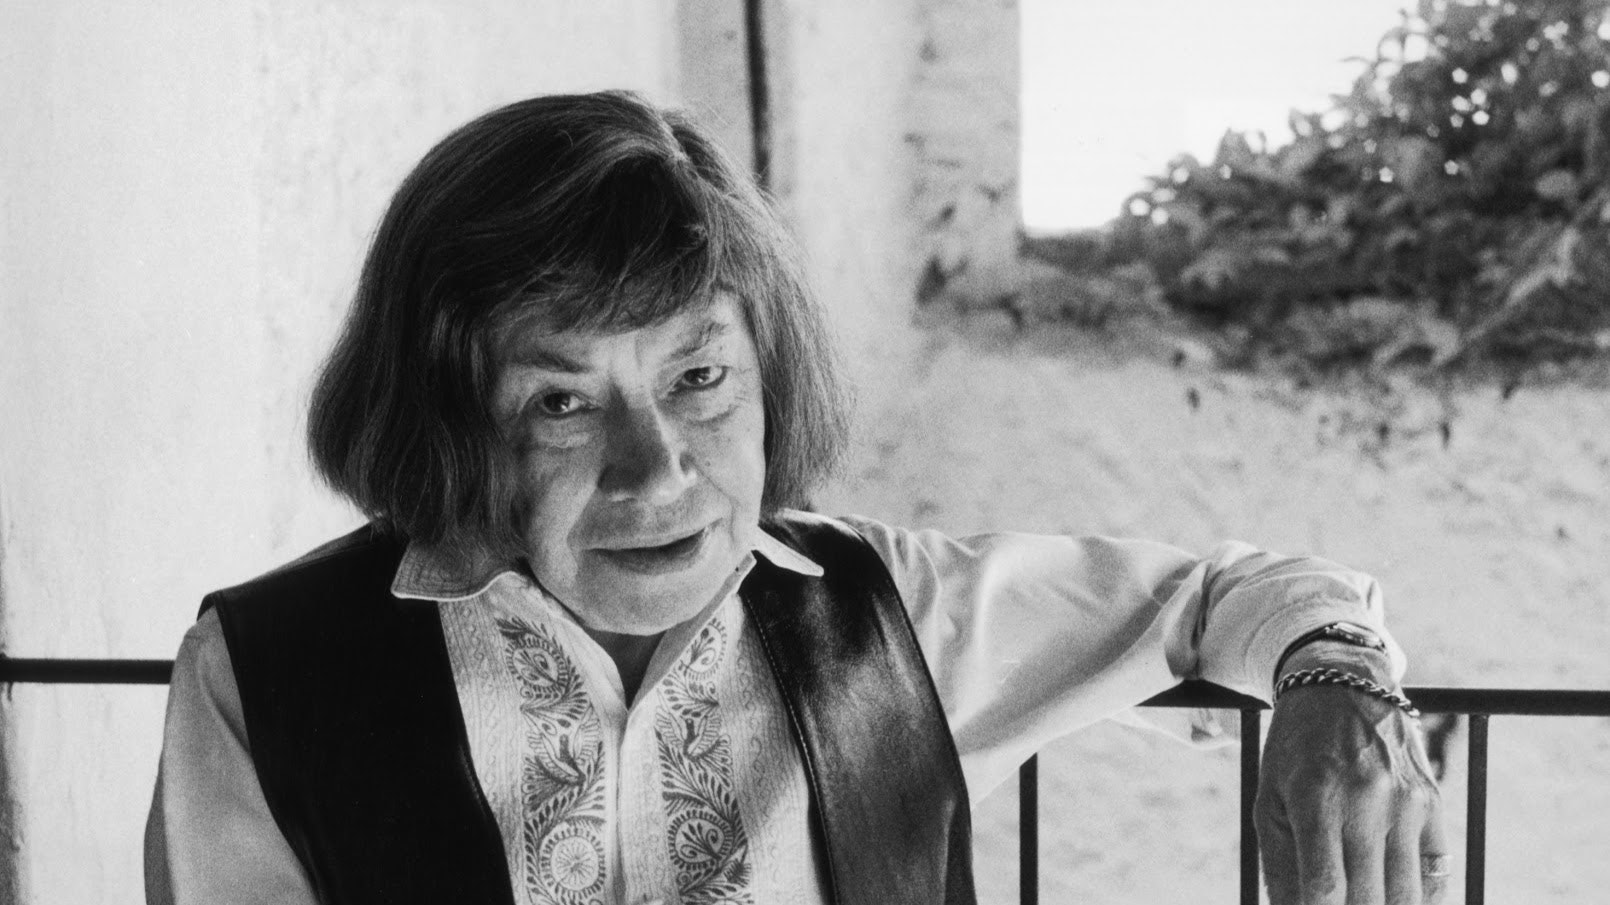 circa 1990:  A portrait of American writer Patricia Highsmith (1921 - 1995) leaning on a railing while sitting on a bench overlooking a courtyard. She is wearing a leather vest with tassels and an embroidered shirt.  (Photo by Horst Tappe/Hulton Archive/Getty Images)